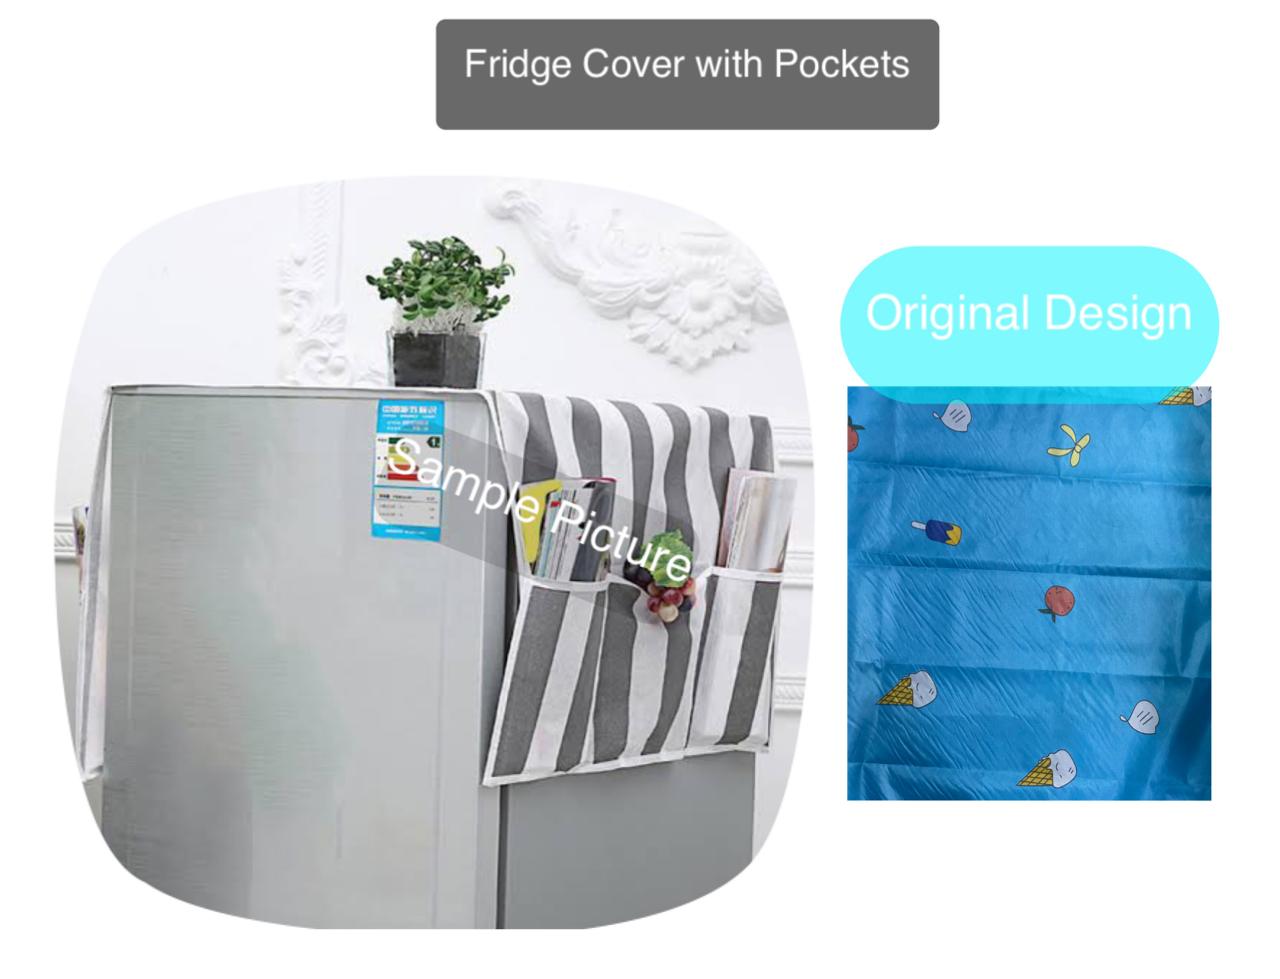 Pack of 2 Double Coated High Quality Fridge Cover with Side Pockets RGshop